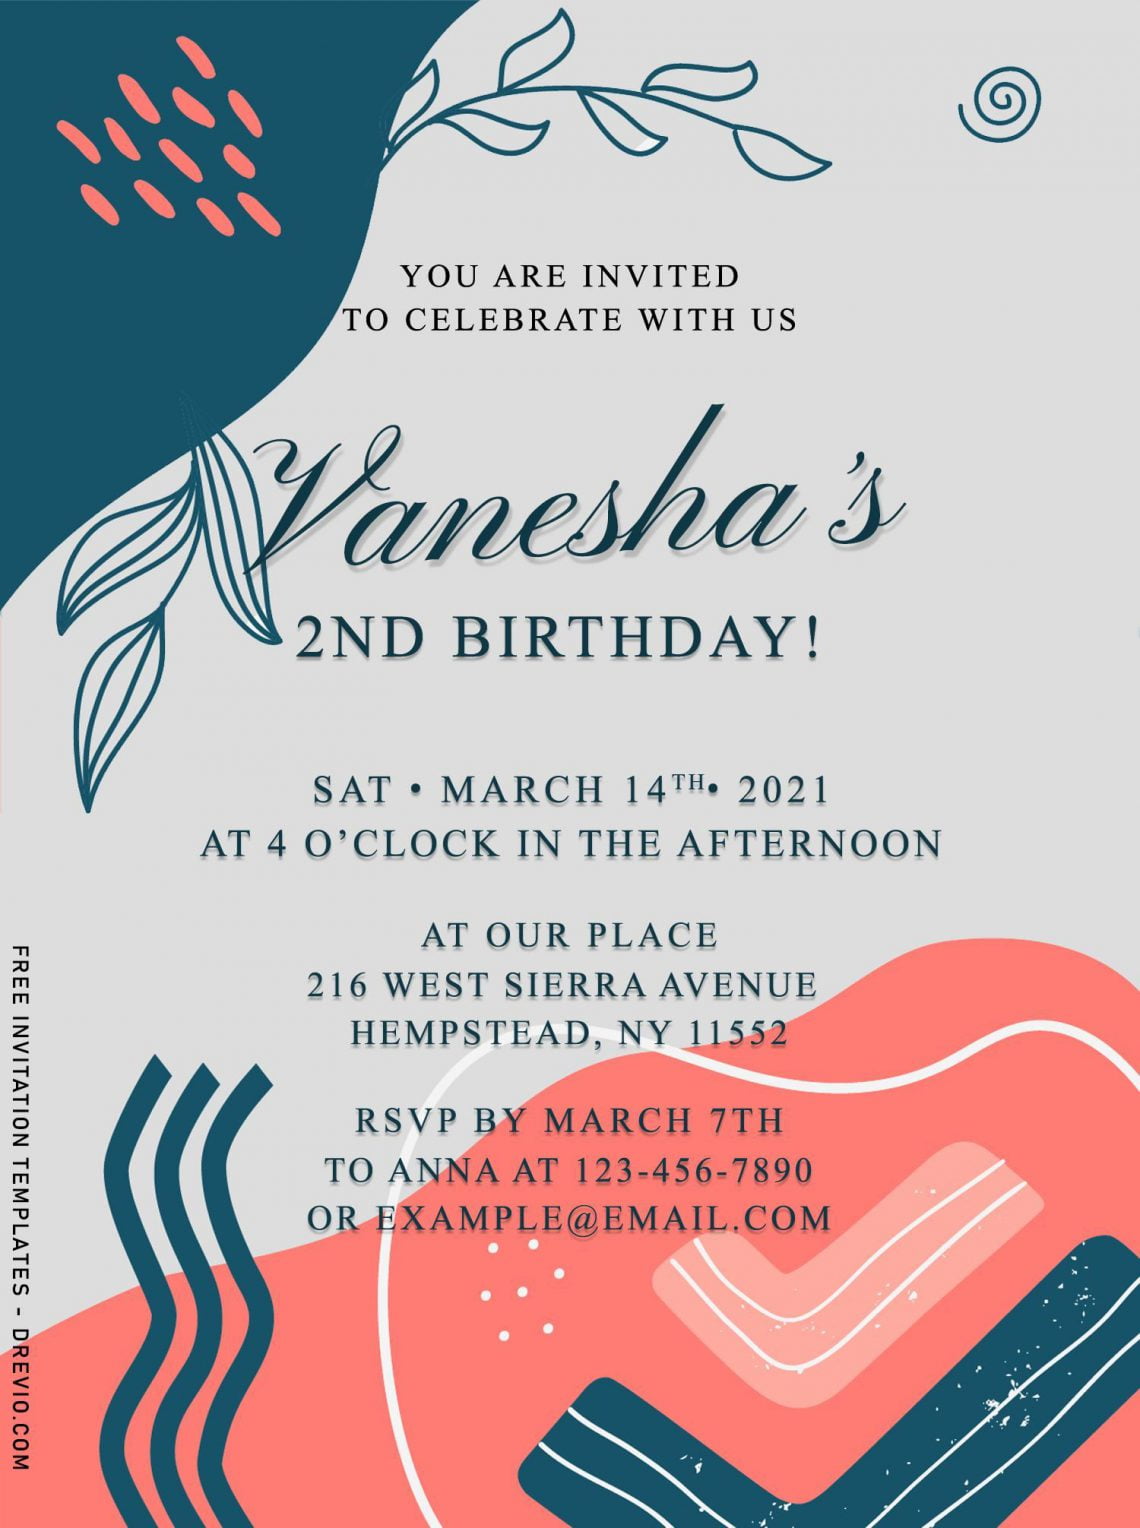 9 Creative Memphis Style Birthday Invitation Templates For Your Kids 